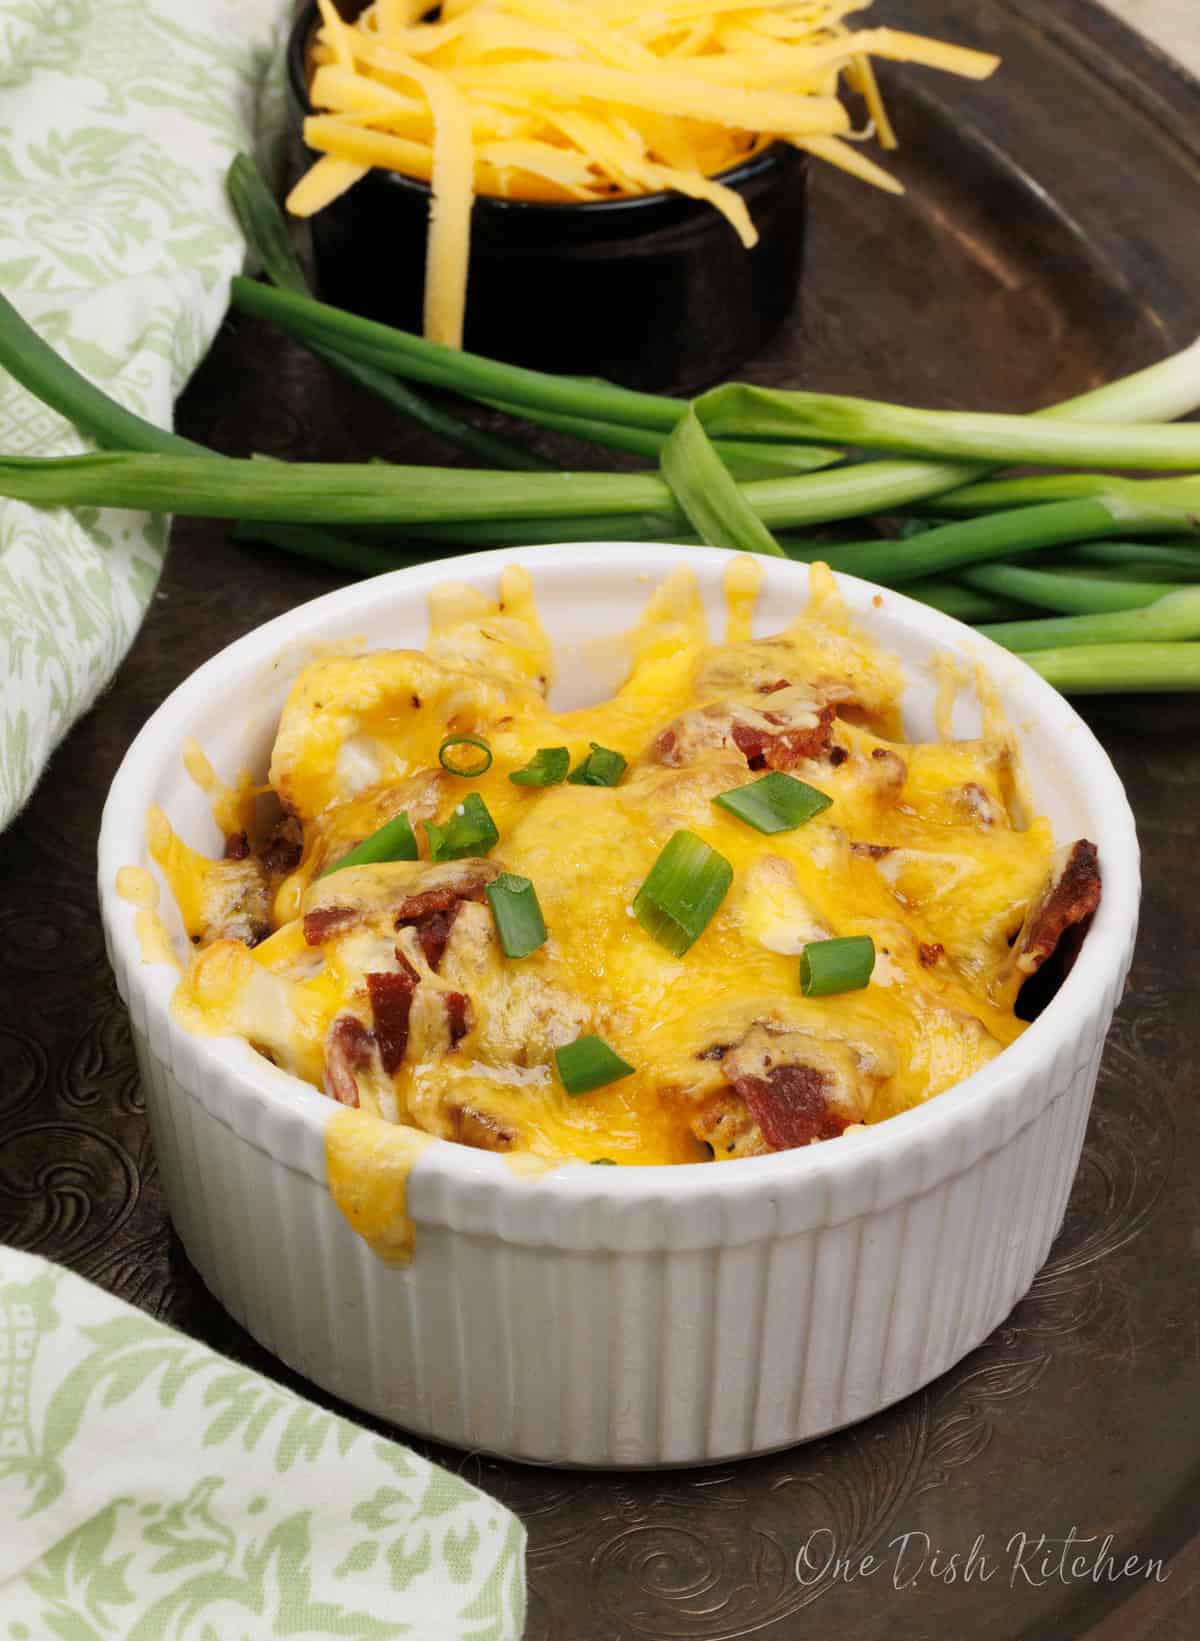 a mini cauliflower casserole topped with green onions next to a bowl of shredded cheddar cheese and a green napkin